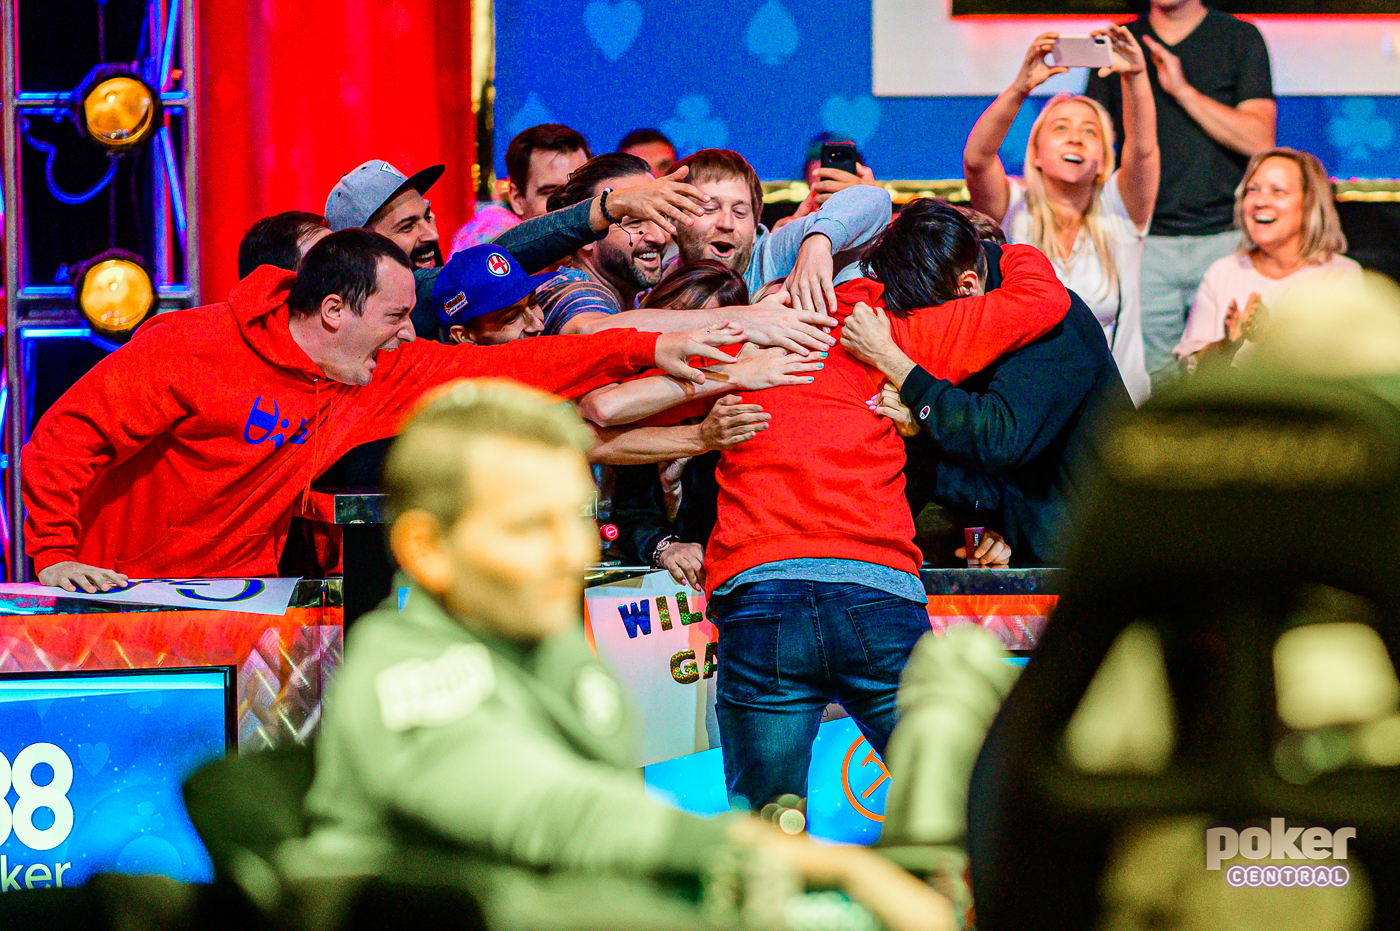 Garry Gates jumps into the arms of his friends and girlfriend celebrating after a big pot.